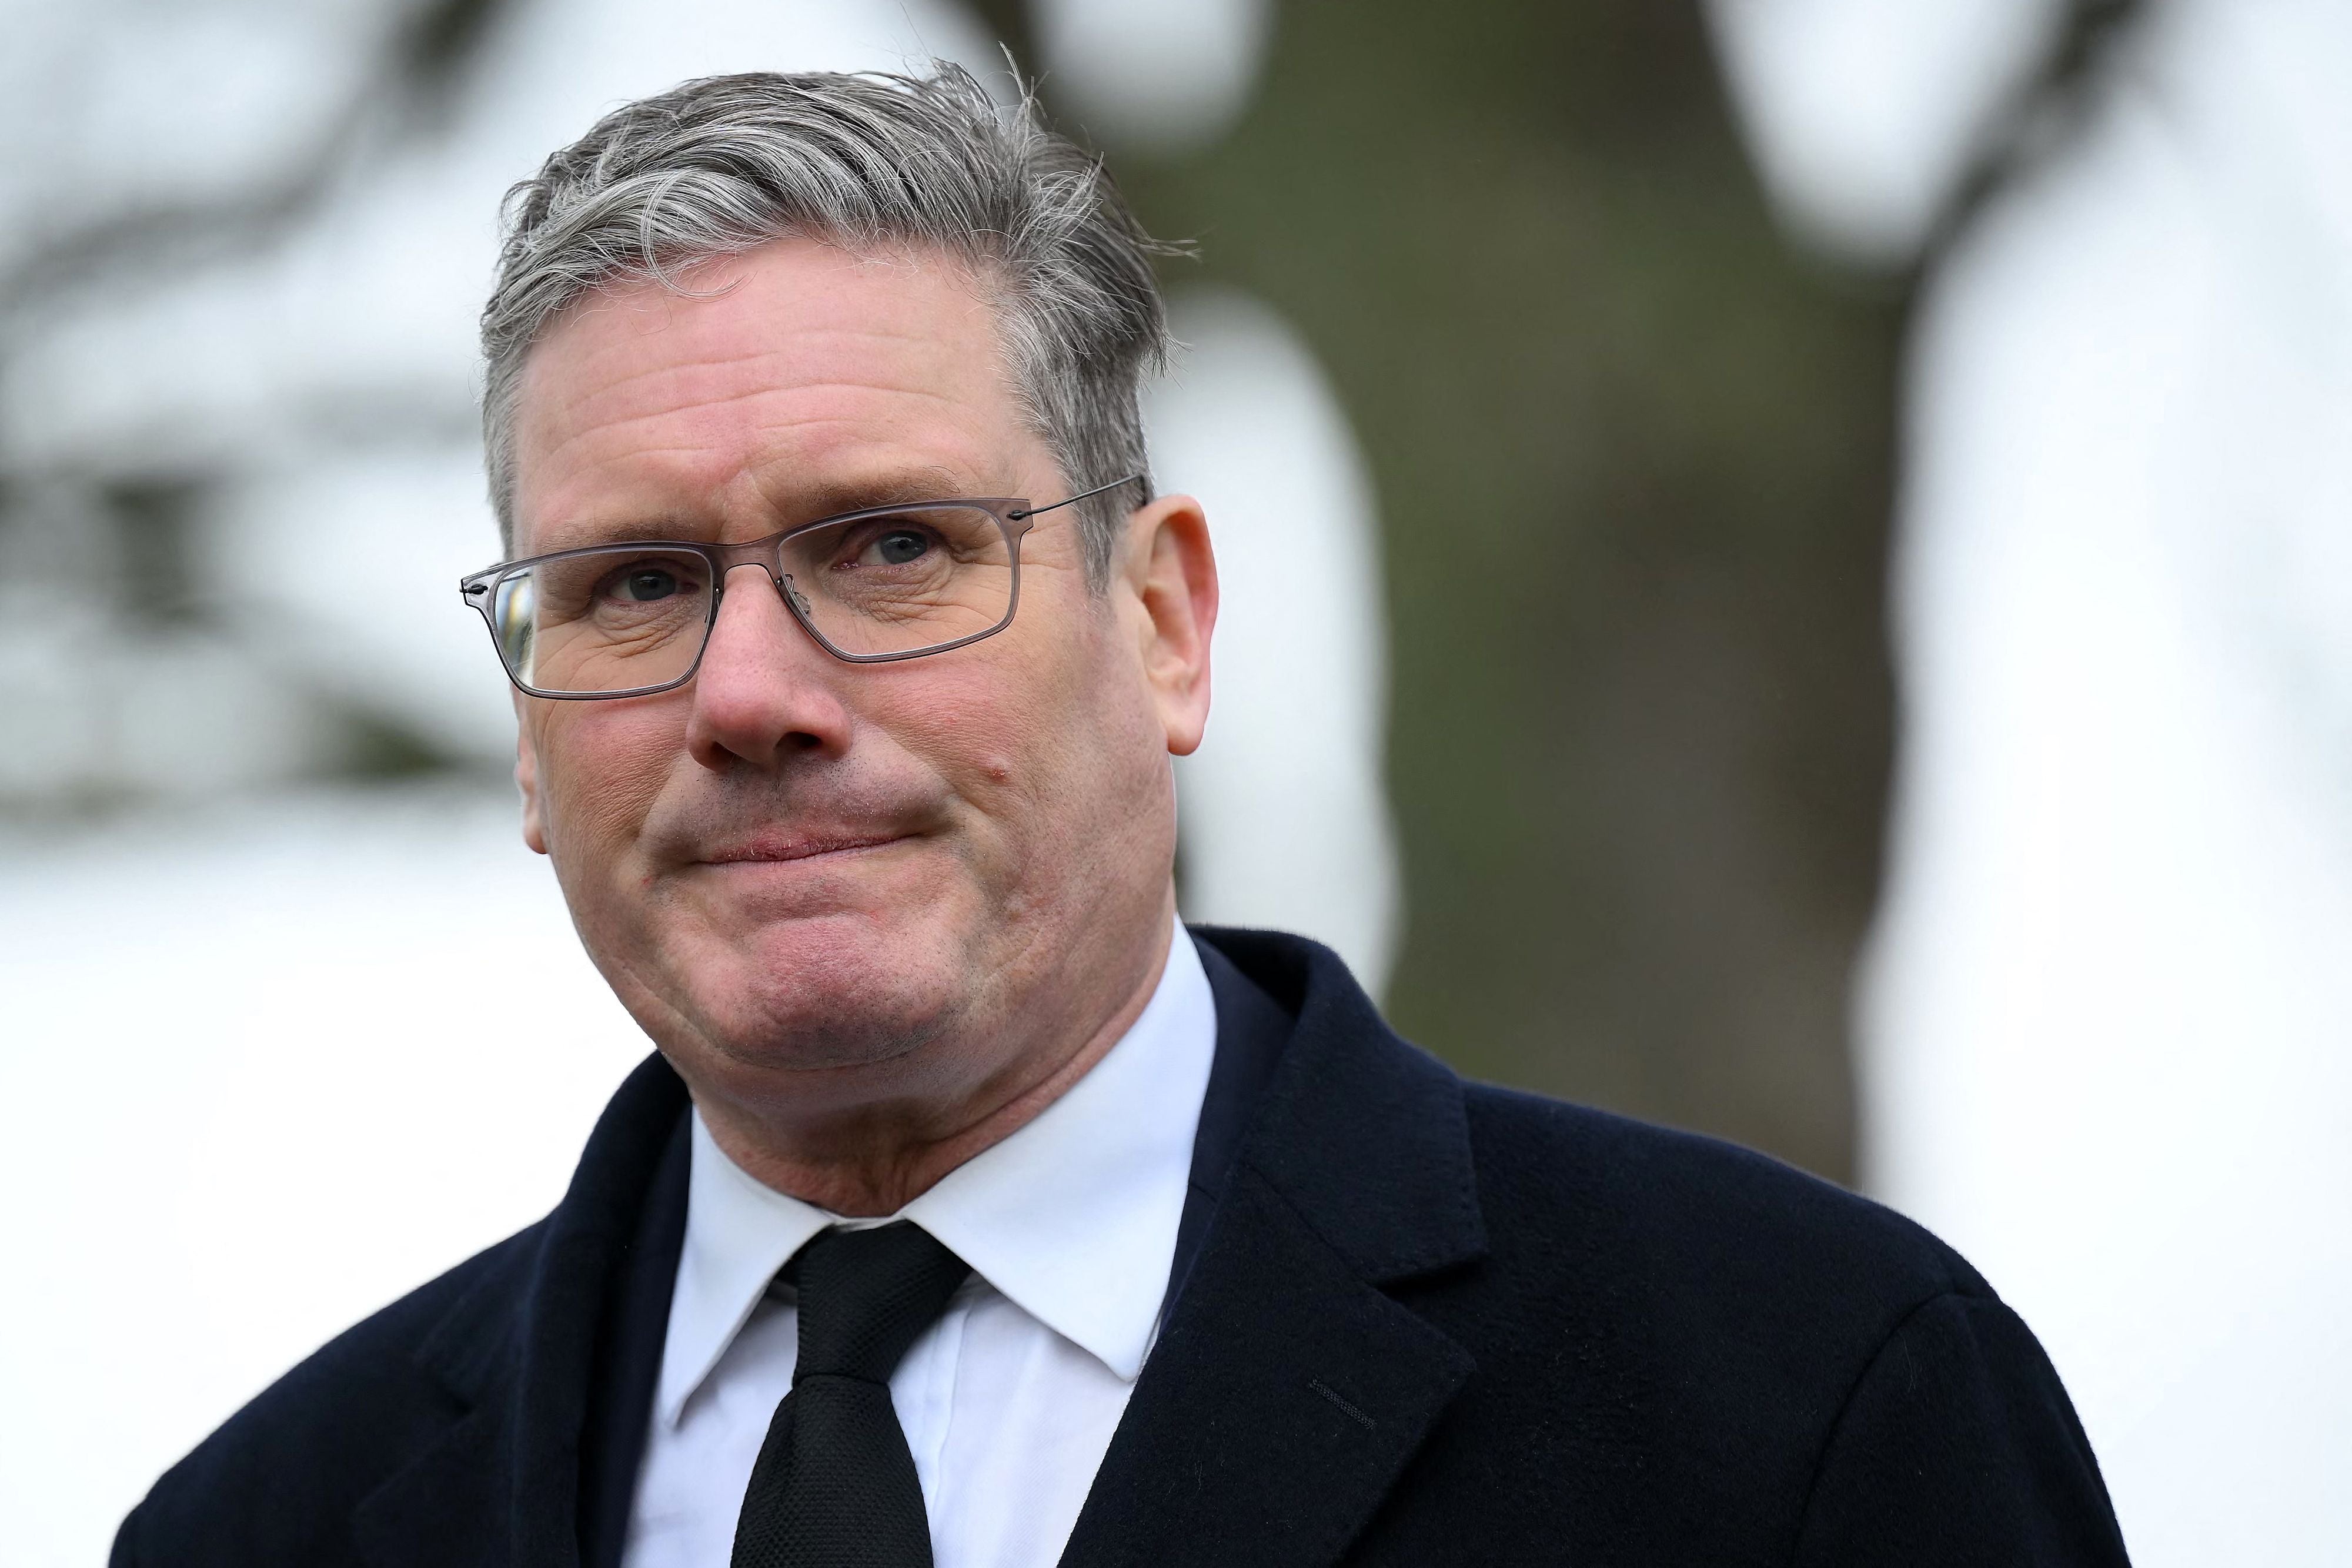 Labour Party leader Keir Starmer accused the government of a “shameful level of incompetence”